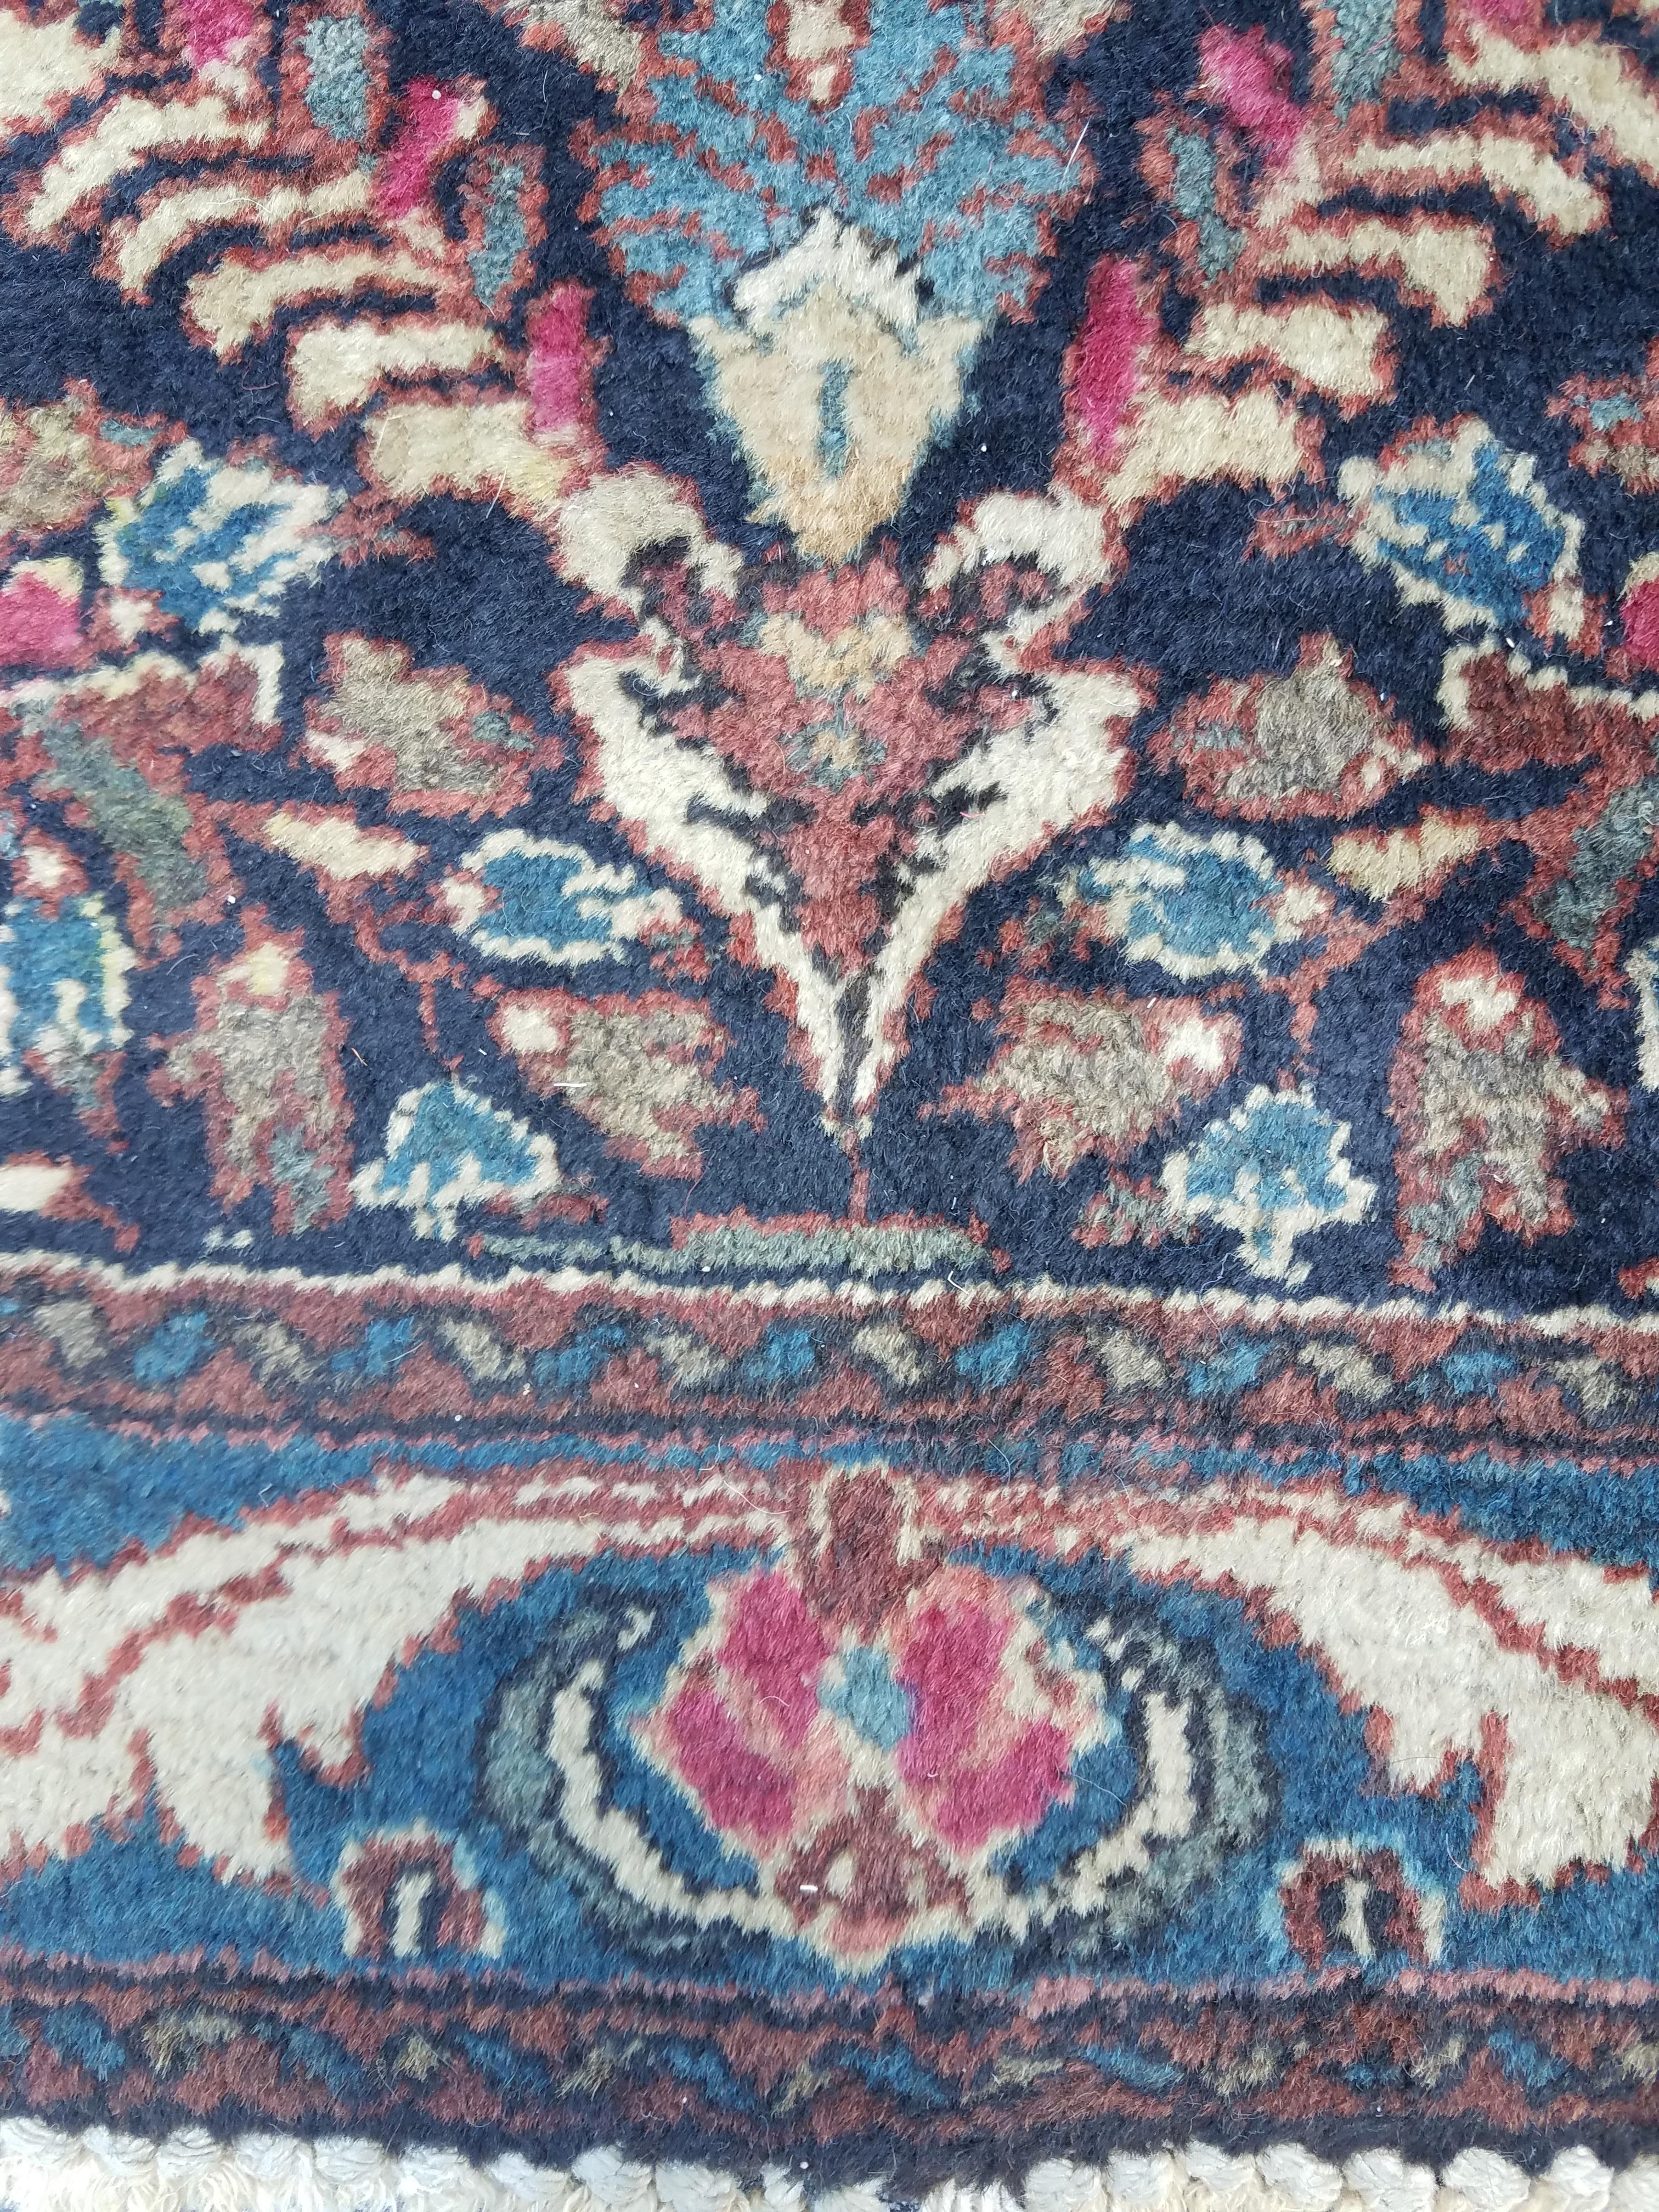 Great Pakistani / Oriental Area Rug - Sar 9 In New Condition For Sale In Orlando, FL